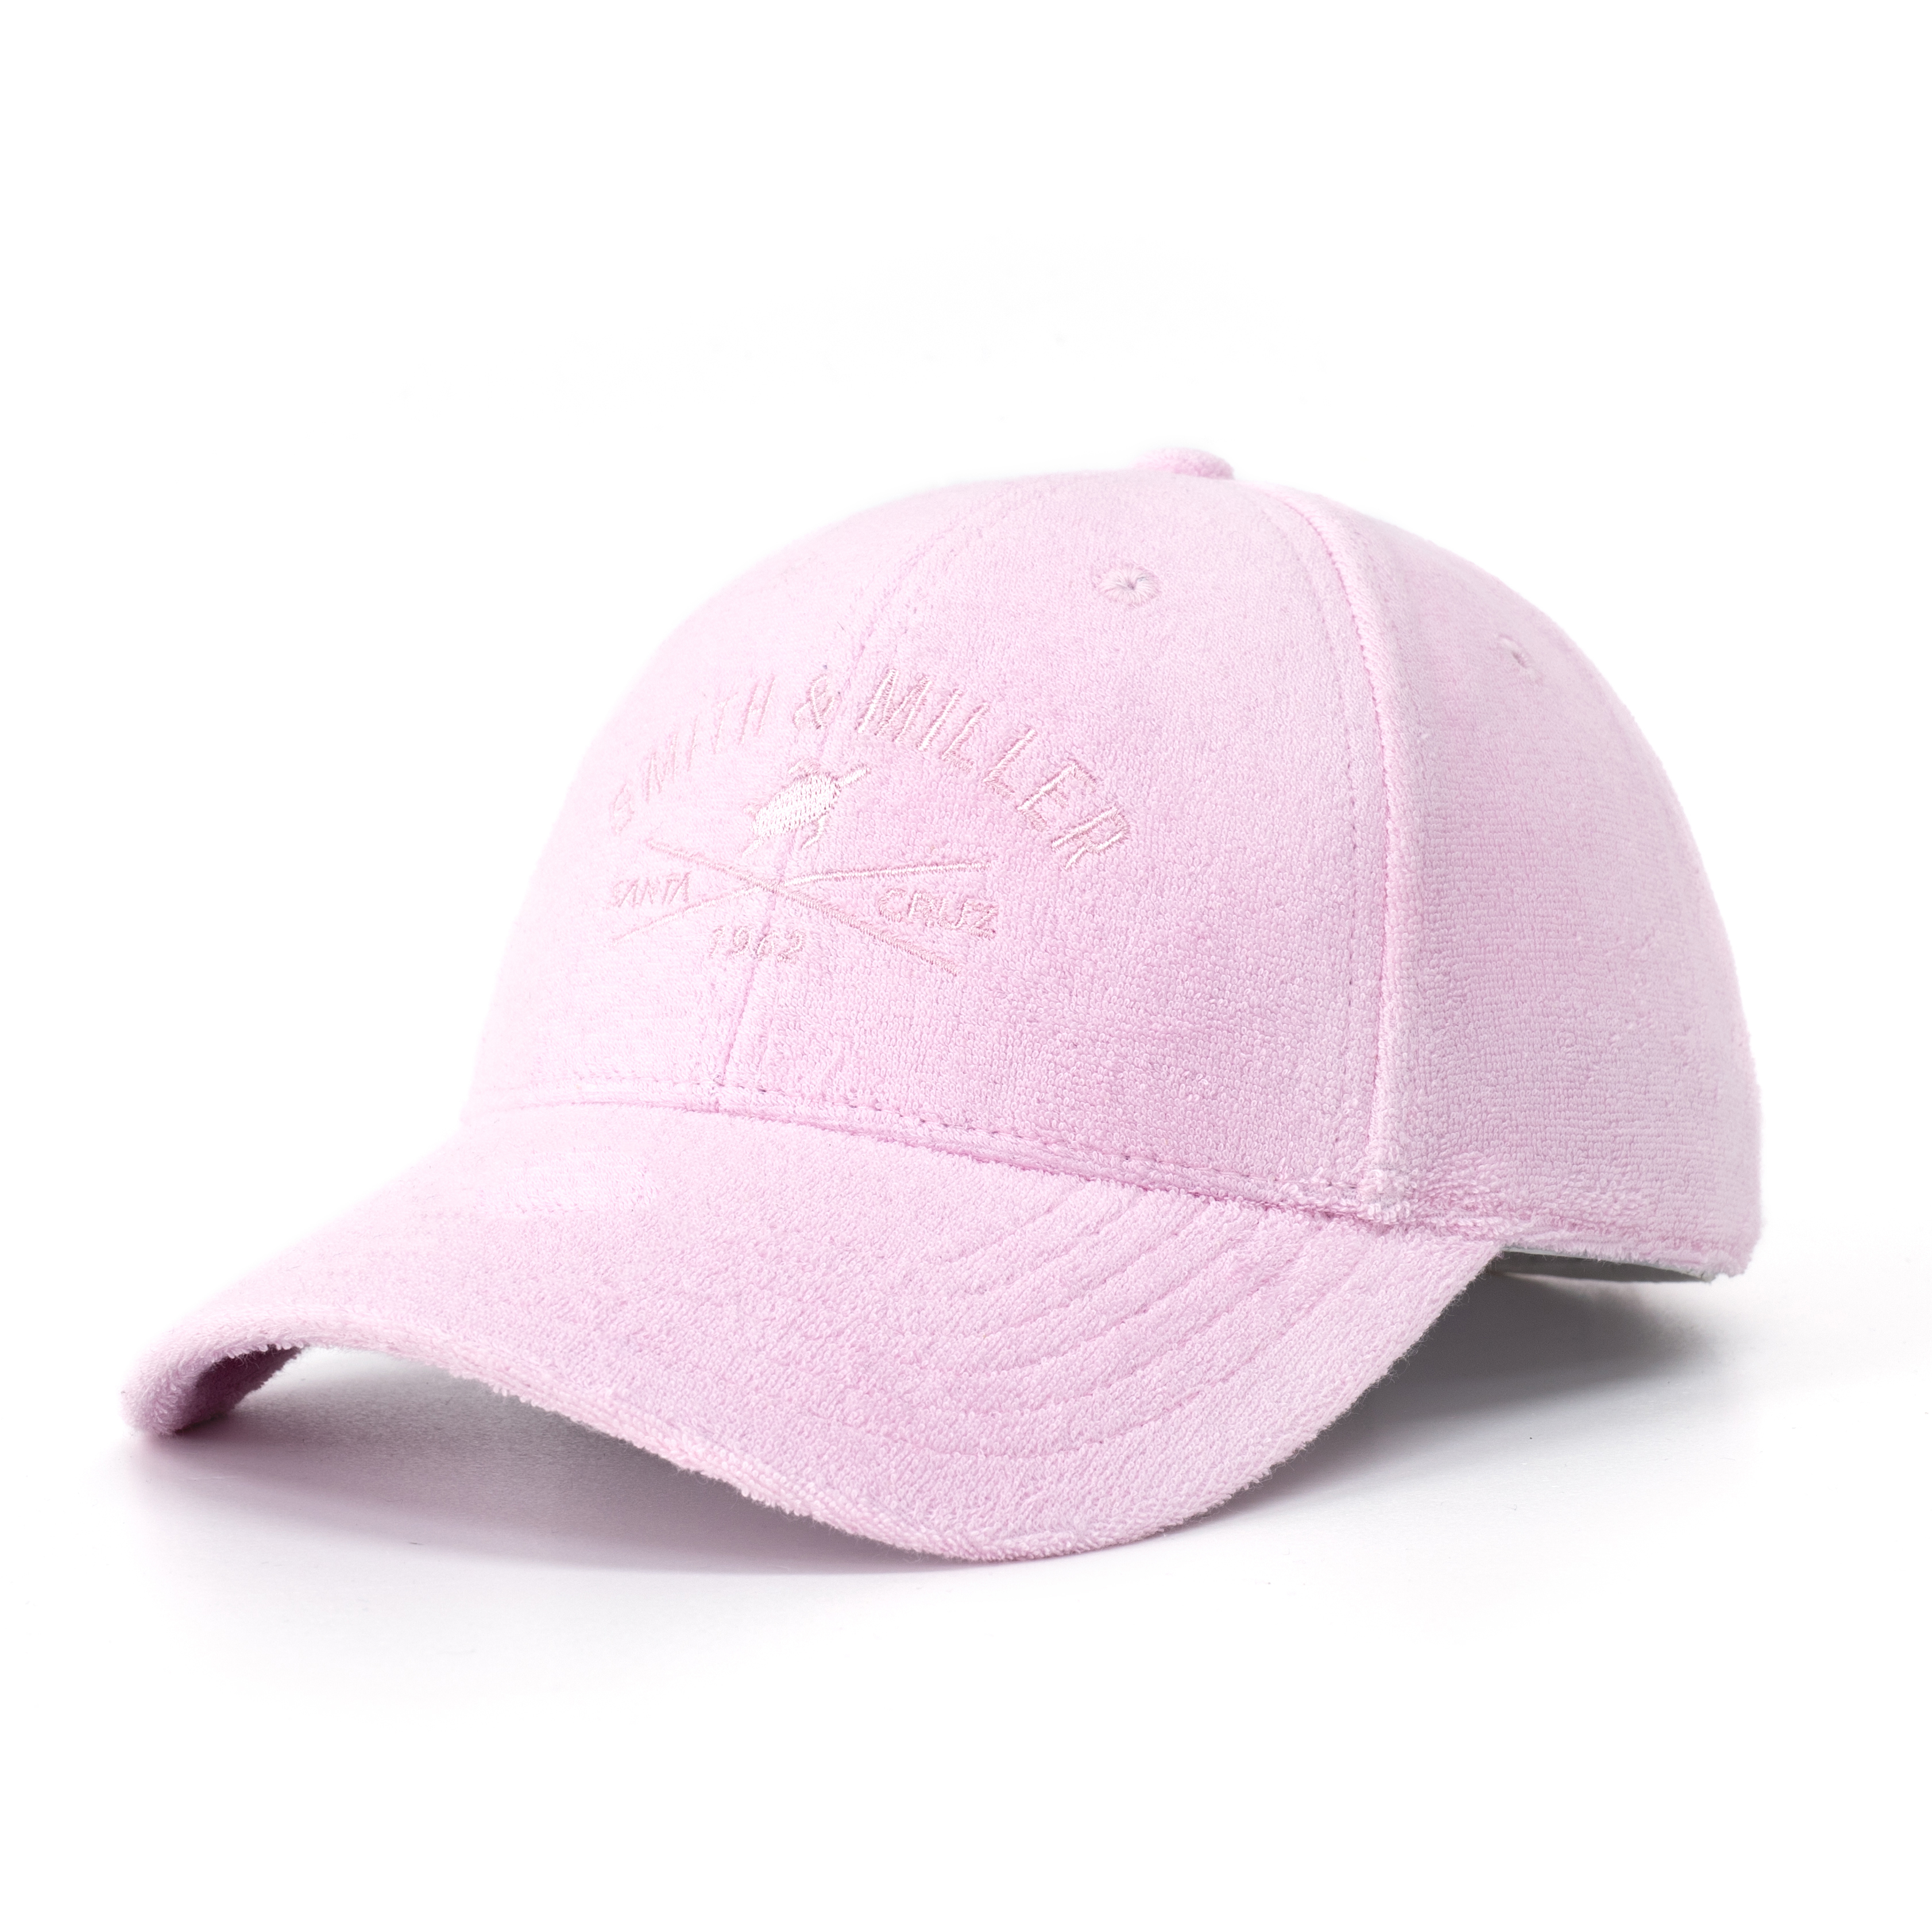 Smith & Miller Likely Women Curved Cap, pink